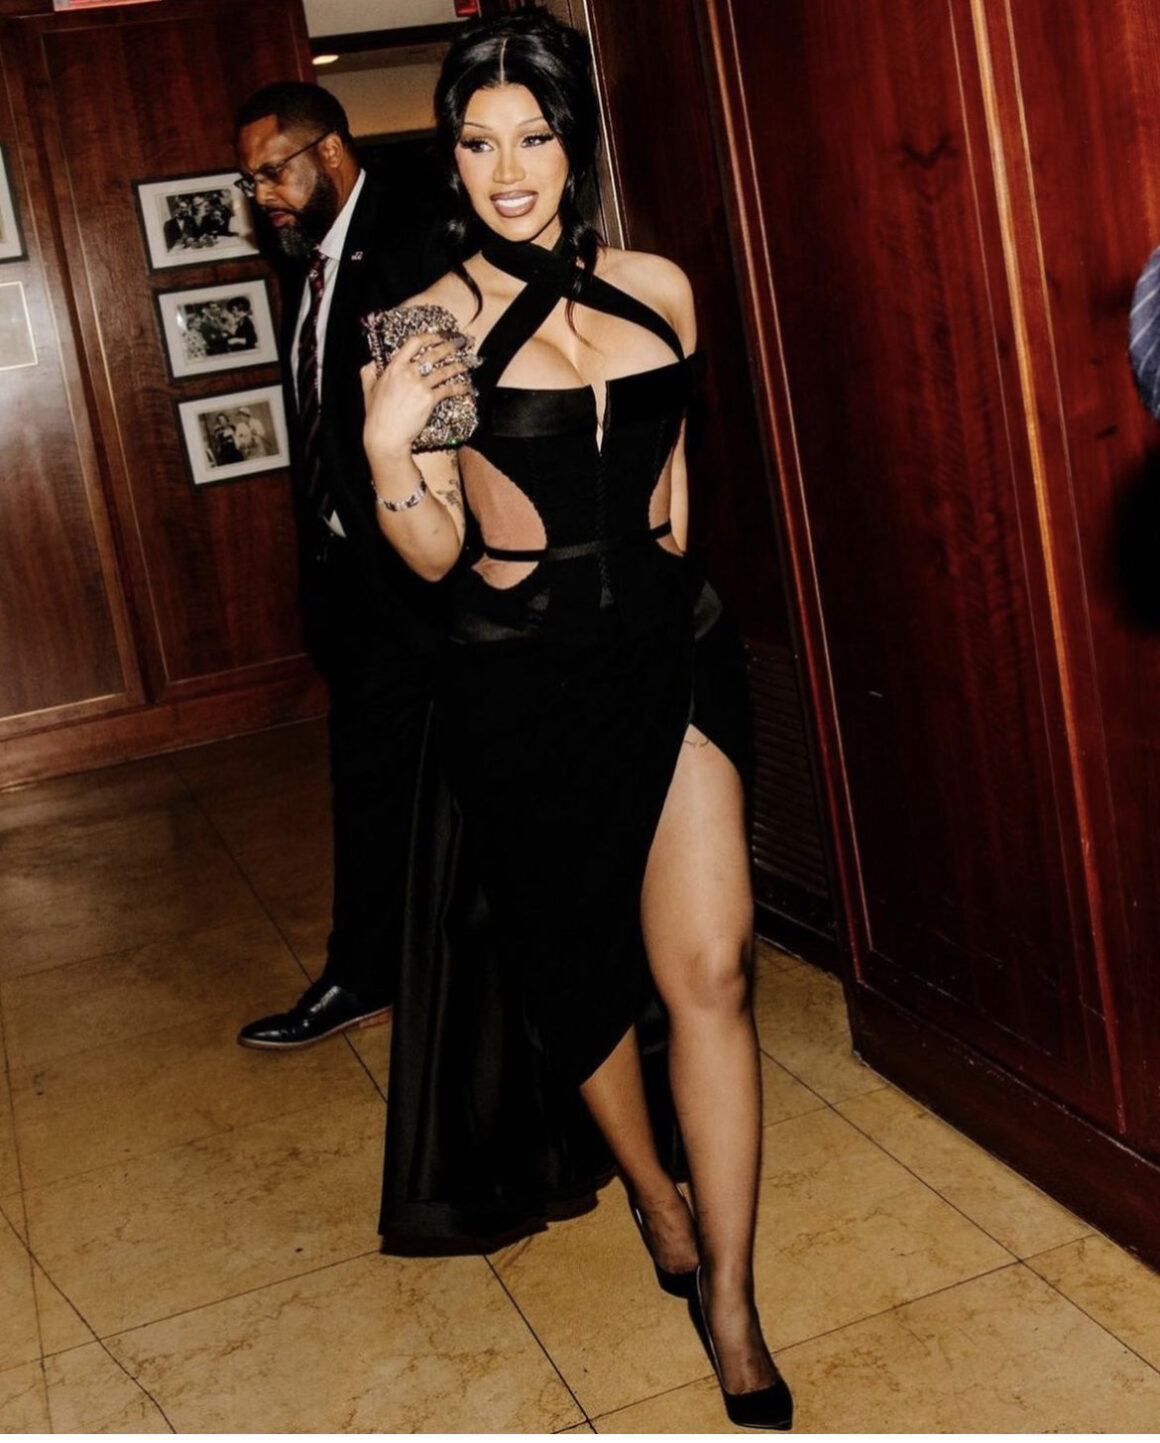 You Ask We Answer Cardi B Attended the Power Stylist Dinner with Kollin Carter in a Black Nicholas Jebran Dress with Black Jimmy Choo Heels 2